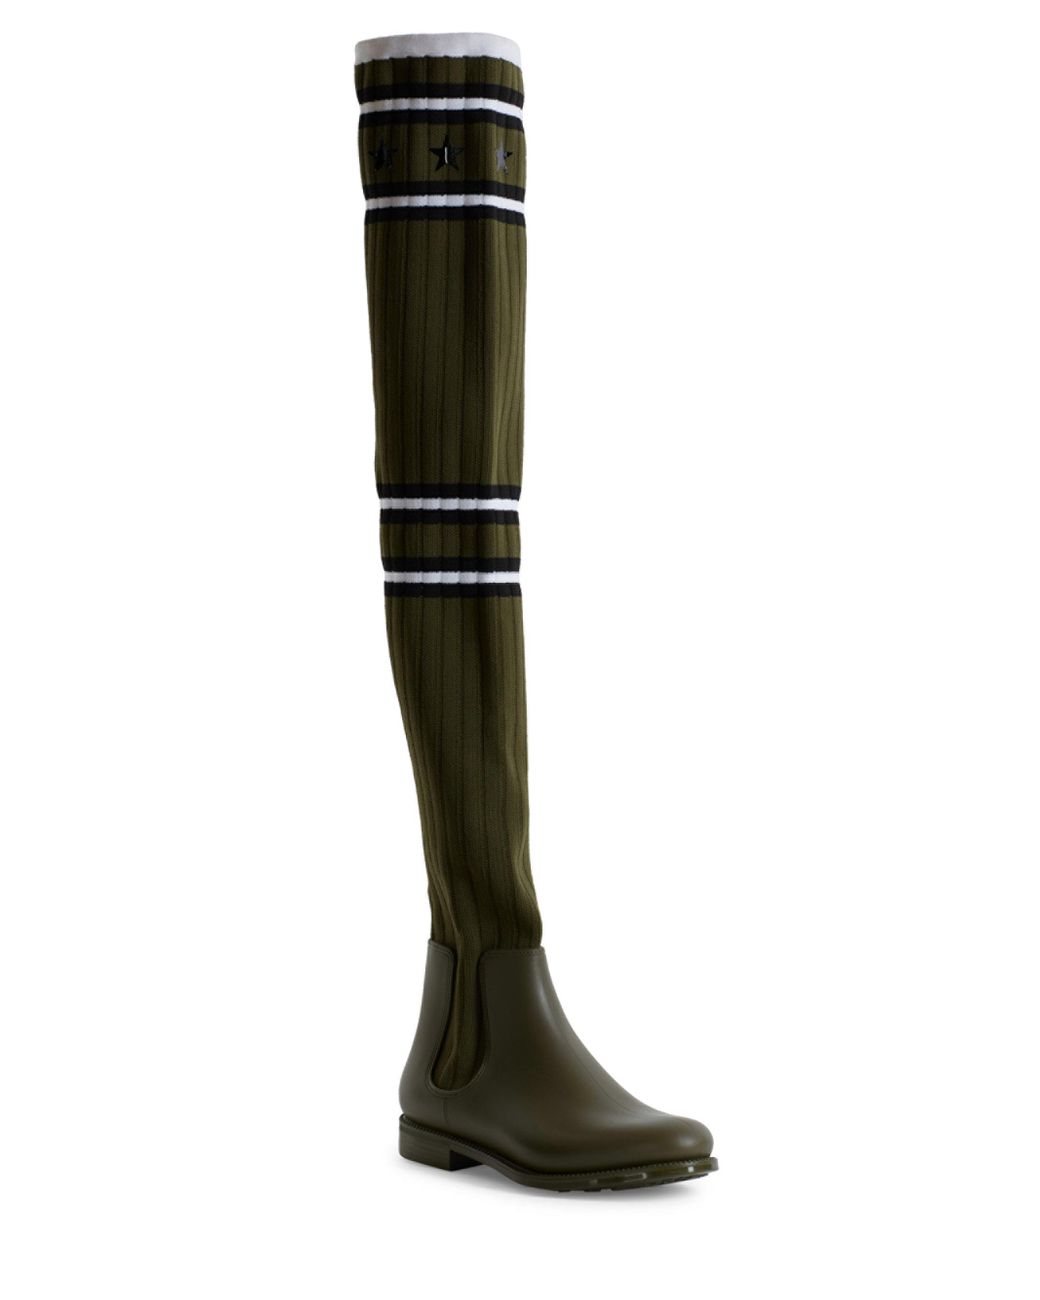 Givenchy Thigh High Sock Rainboots in Black | Lyst